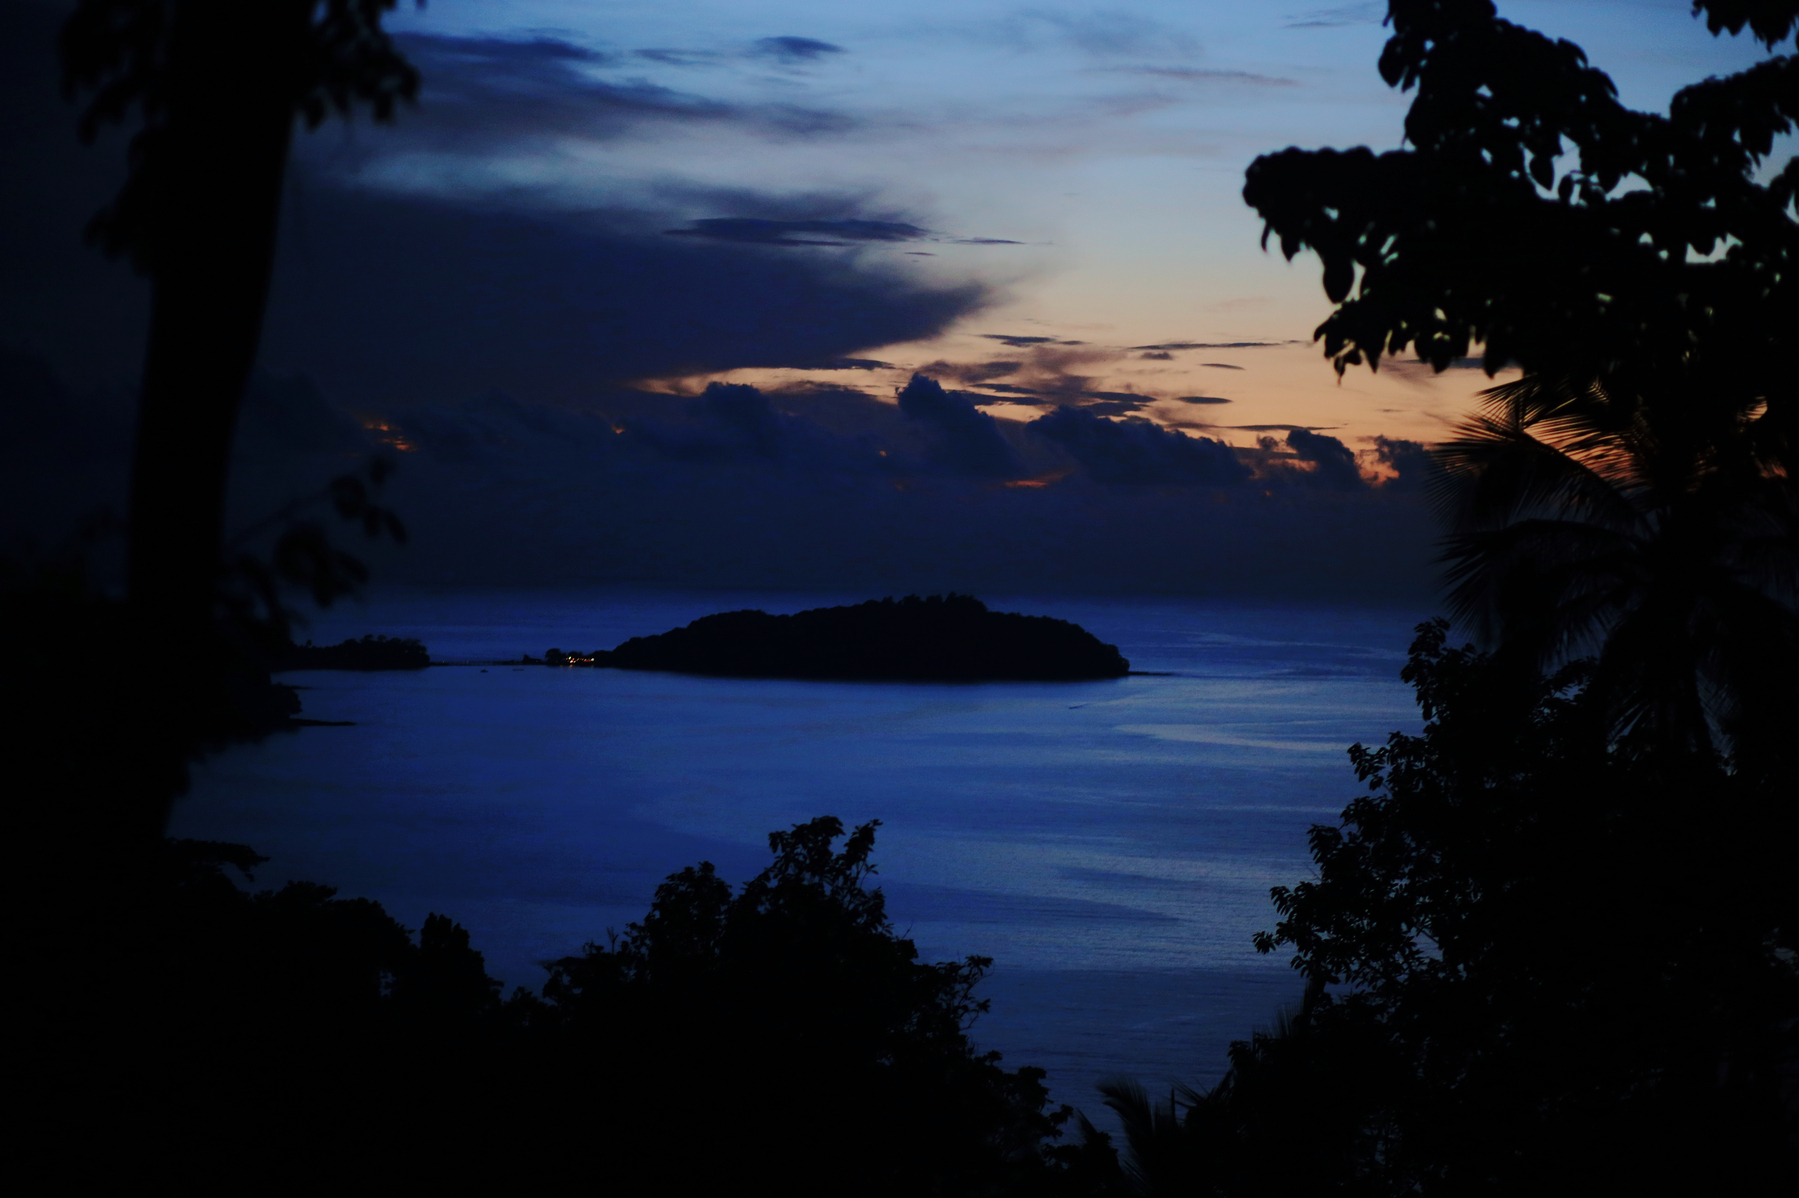 an islet is seen in the middle of the ocean, night time